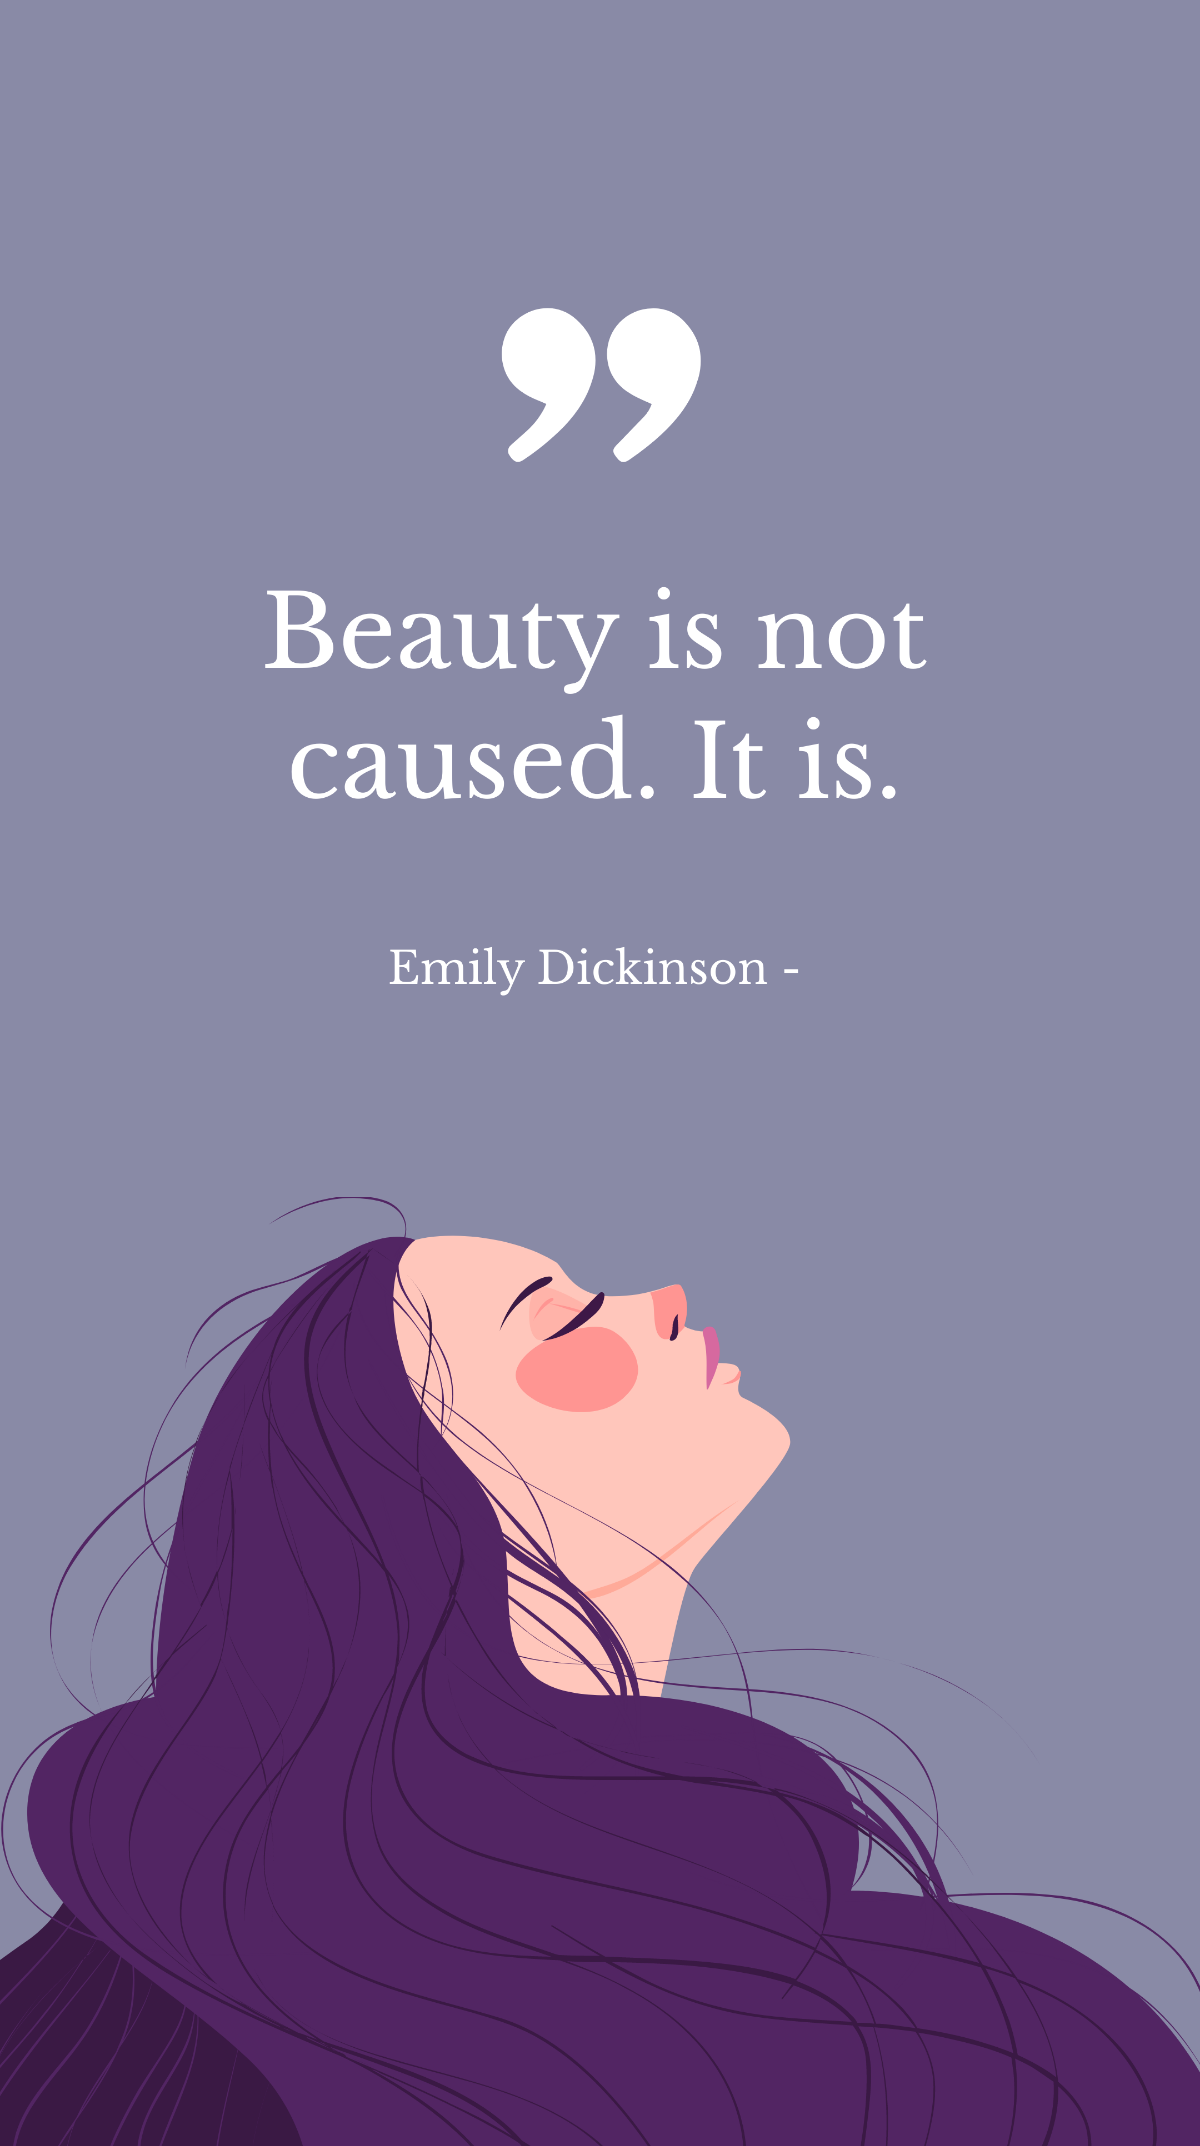 Emily Dickinson - Beauty is not caused. It is. Template